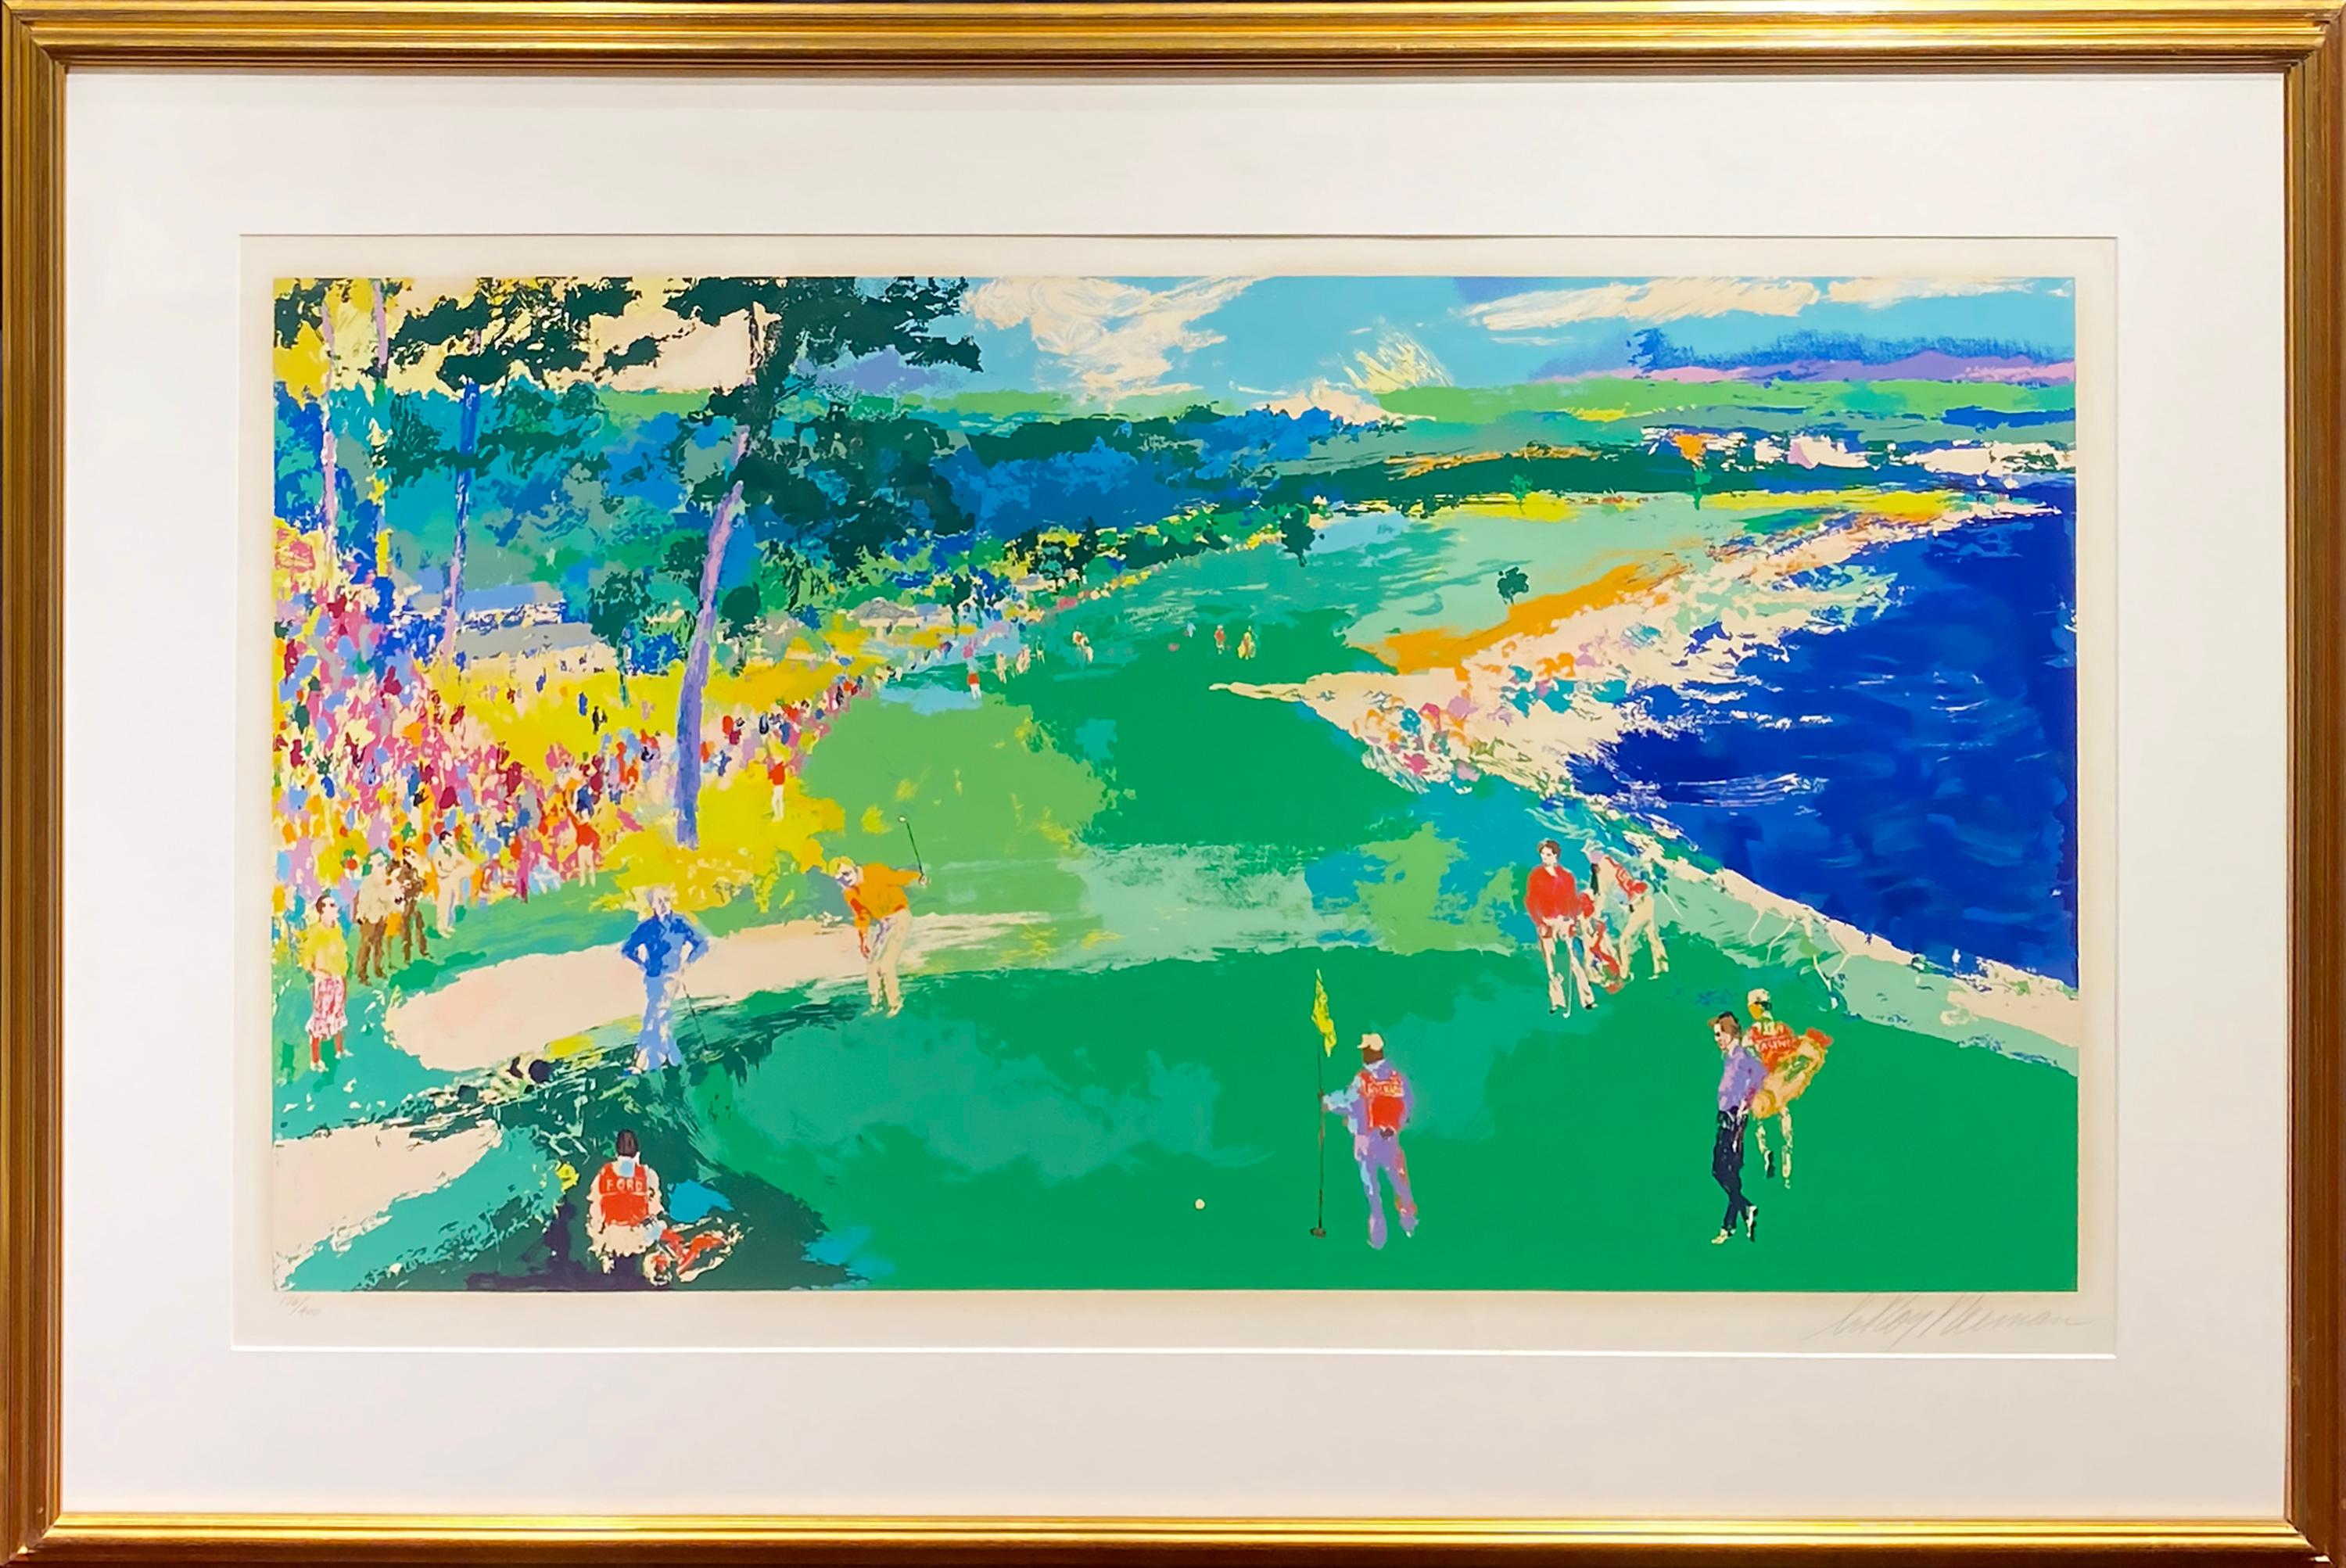 The 18th at Pebble Beach - Print by Leroy Neiman